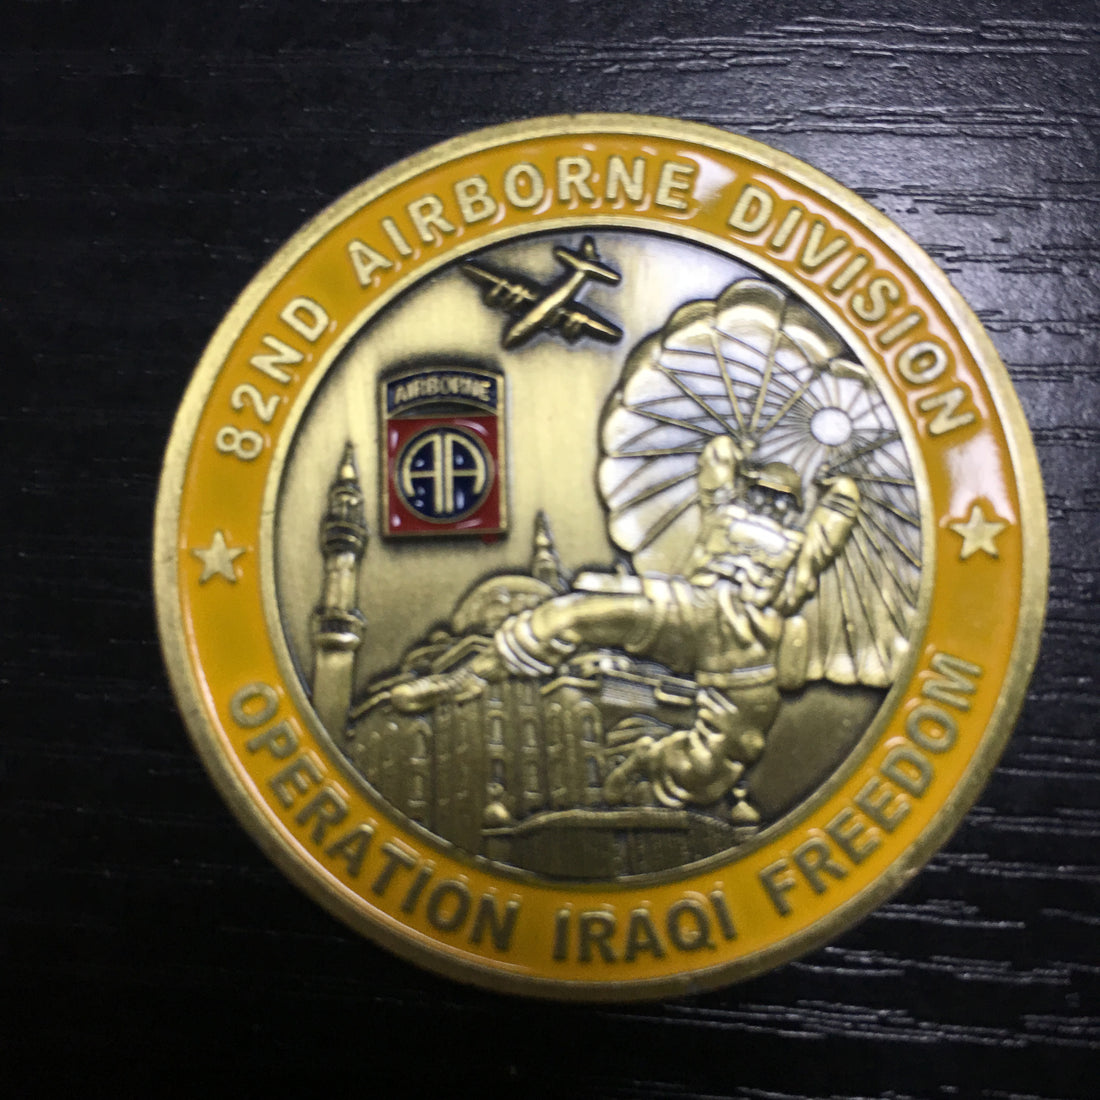 Challenge coin of Saint George pray for us, Operation Iraqi Freedom, 82ND Airborne Division